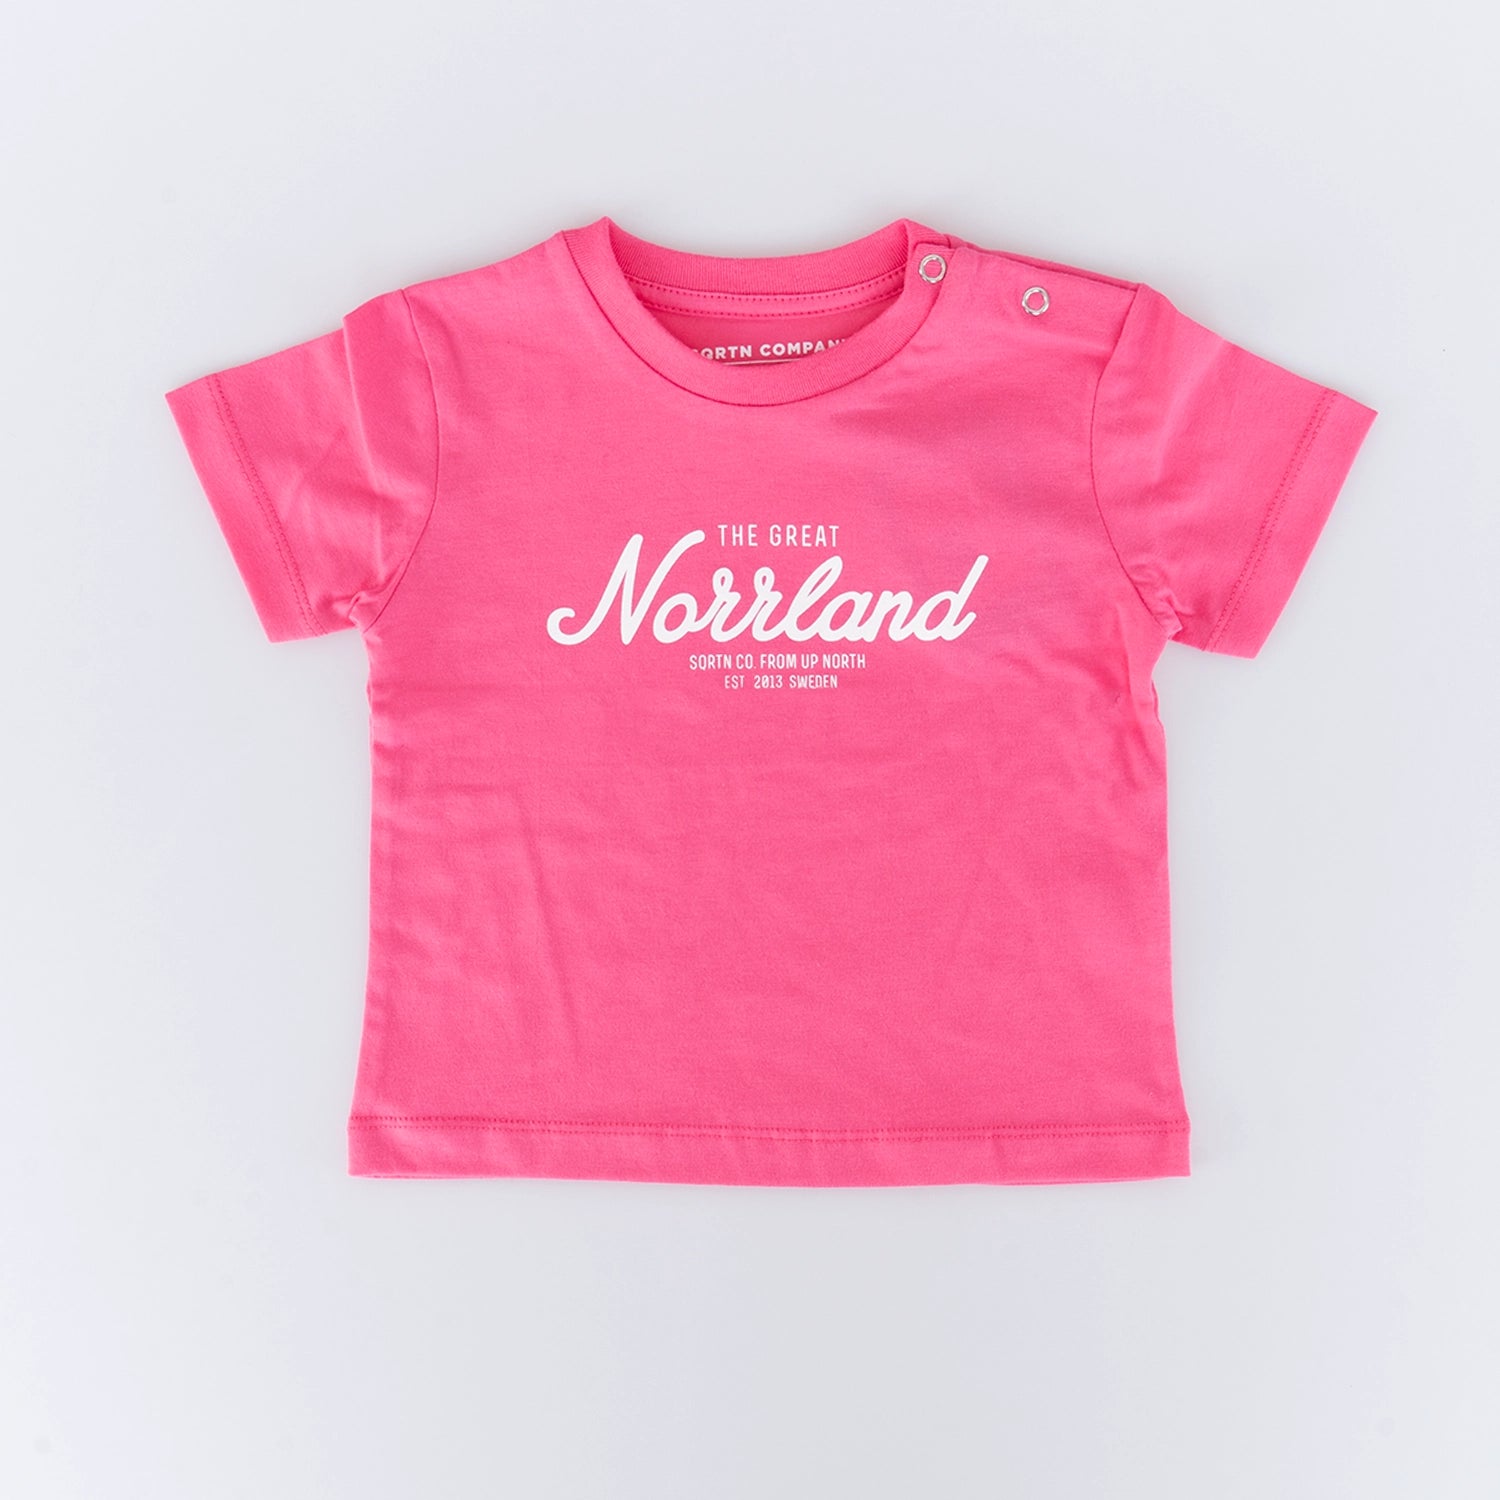 GREAT NORRLAND KIDS T-SHIRT - HOT PINK